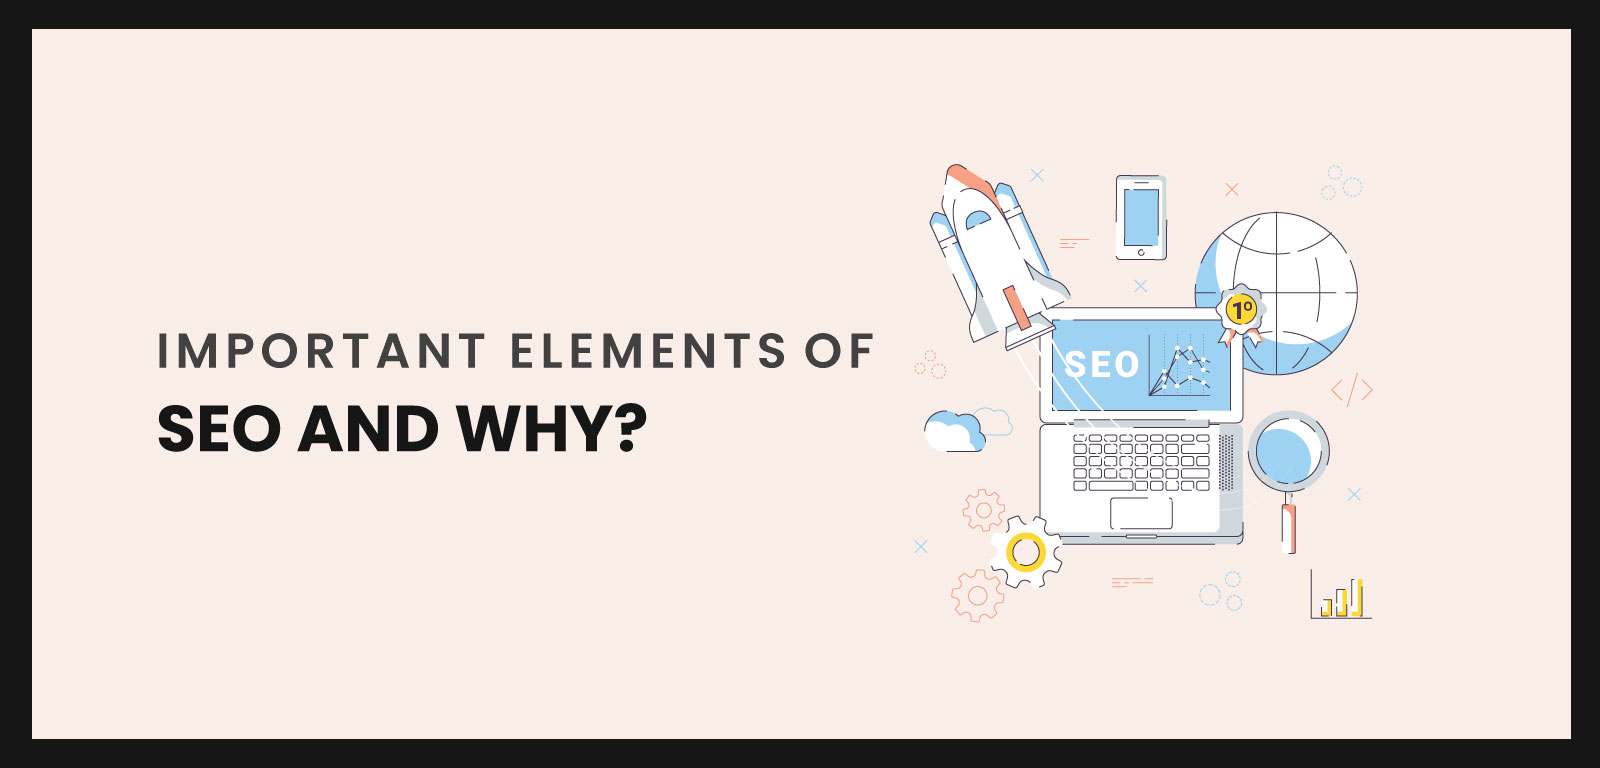 Important elements of SEO and why?